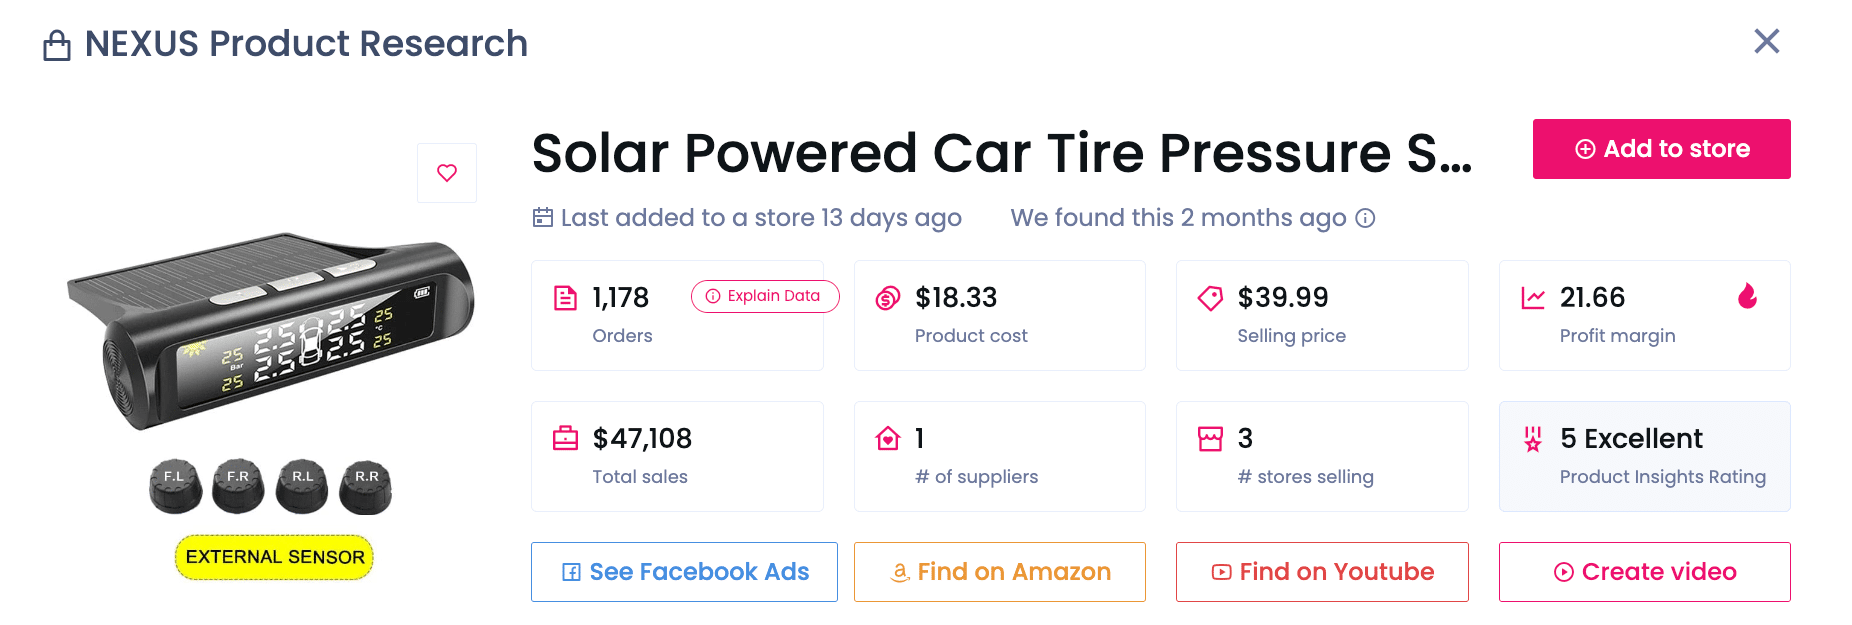 Solar Powered Car Tire Pressure System Stats